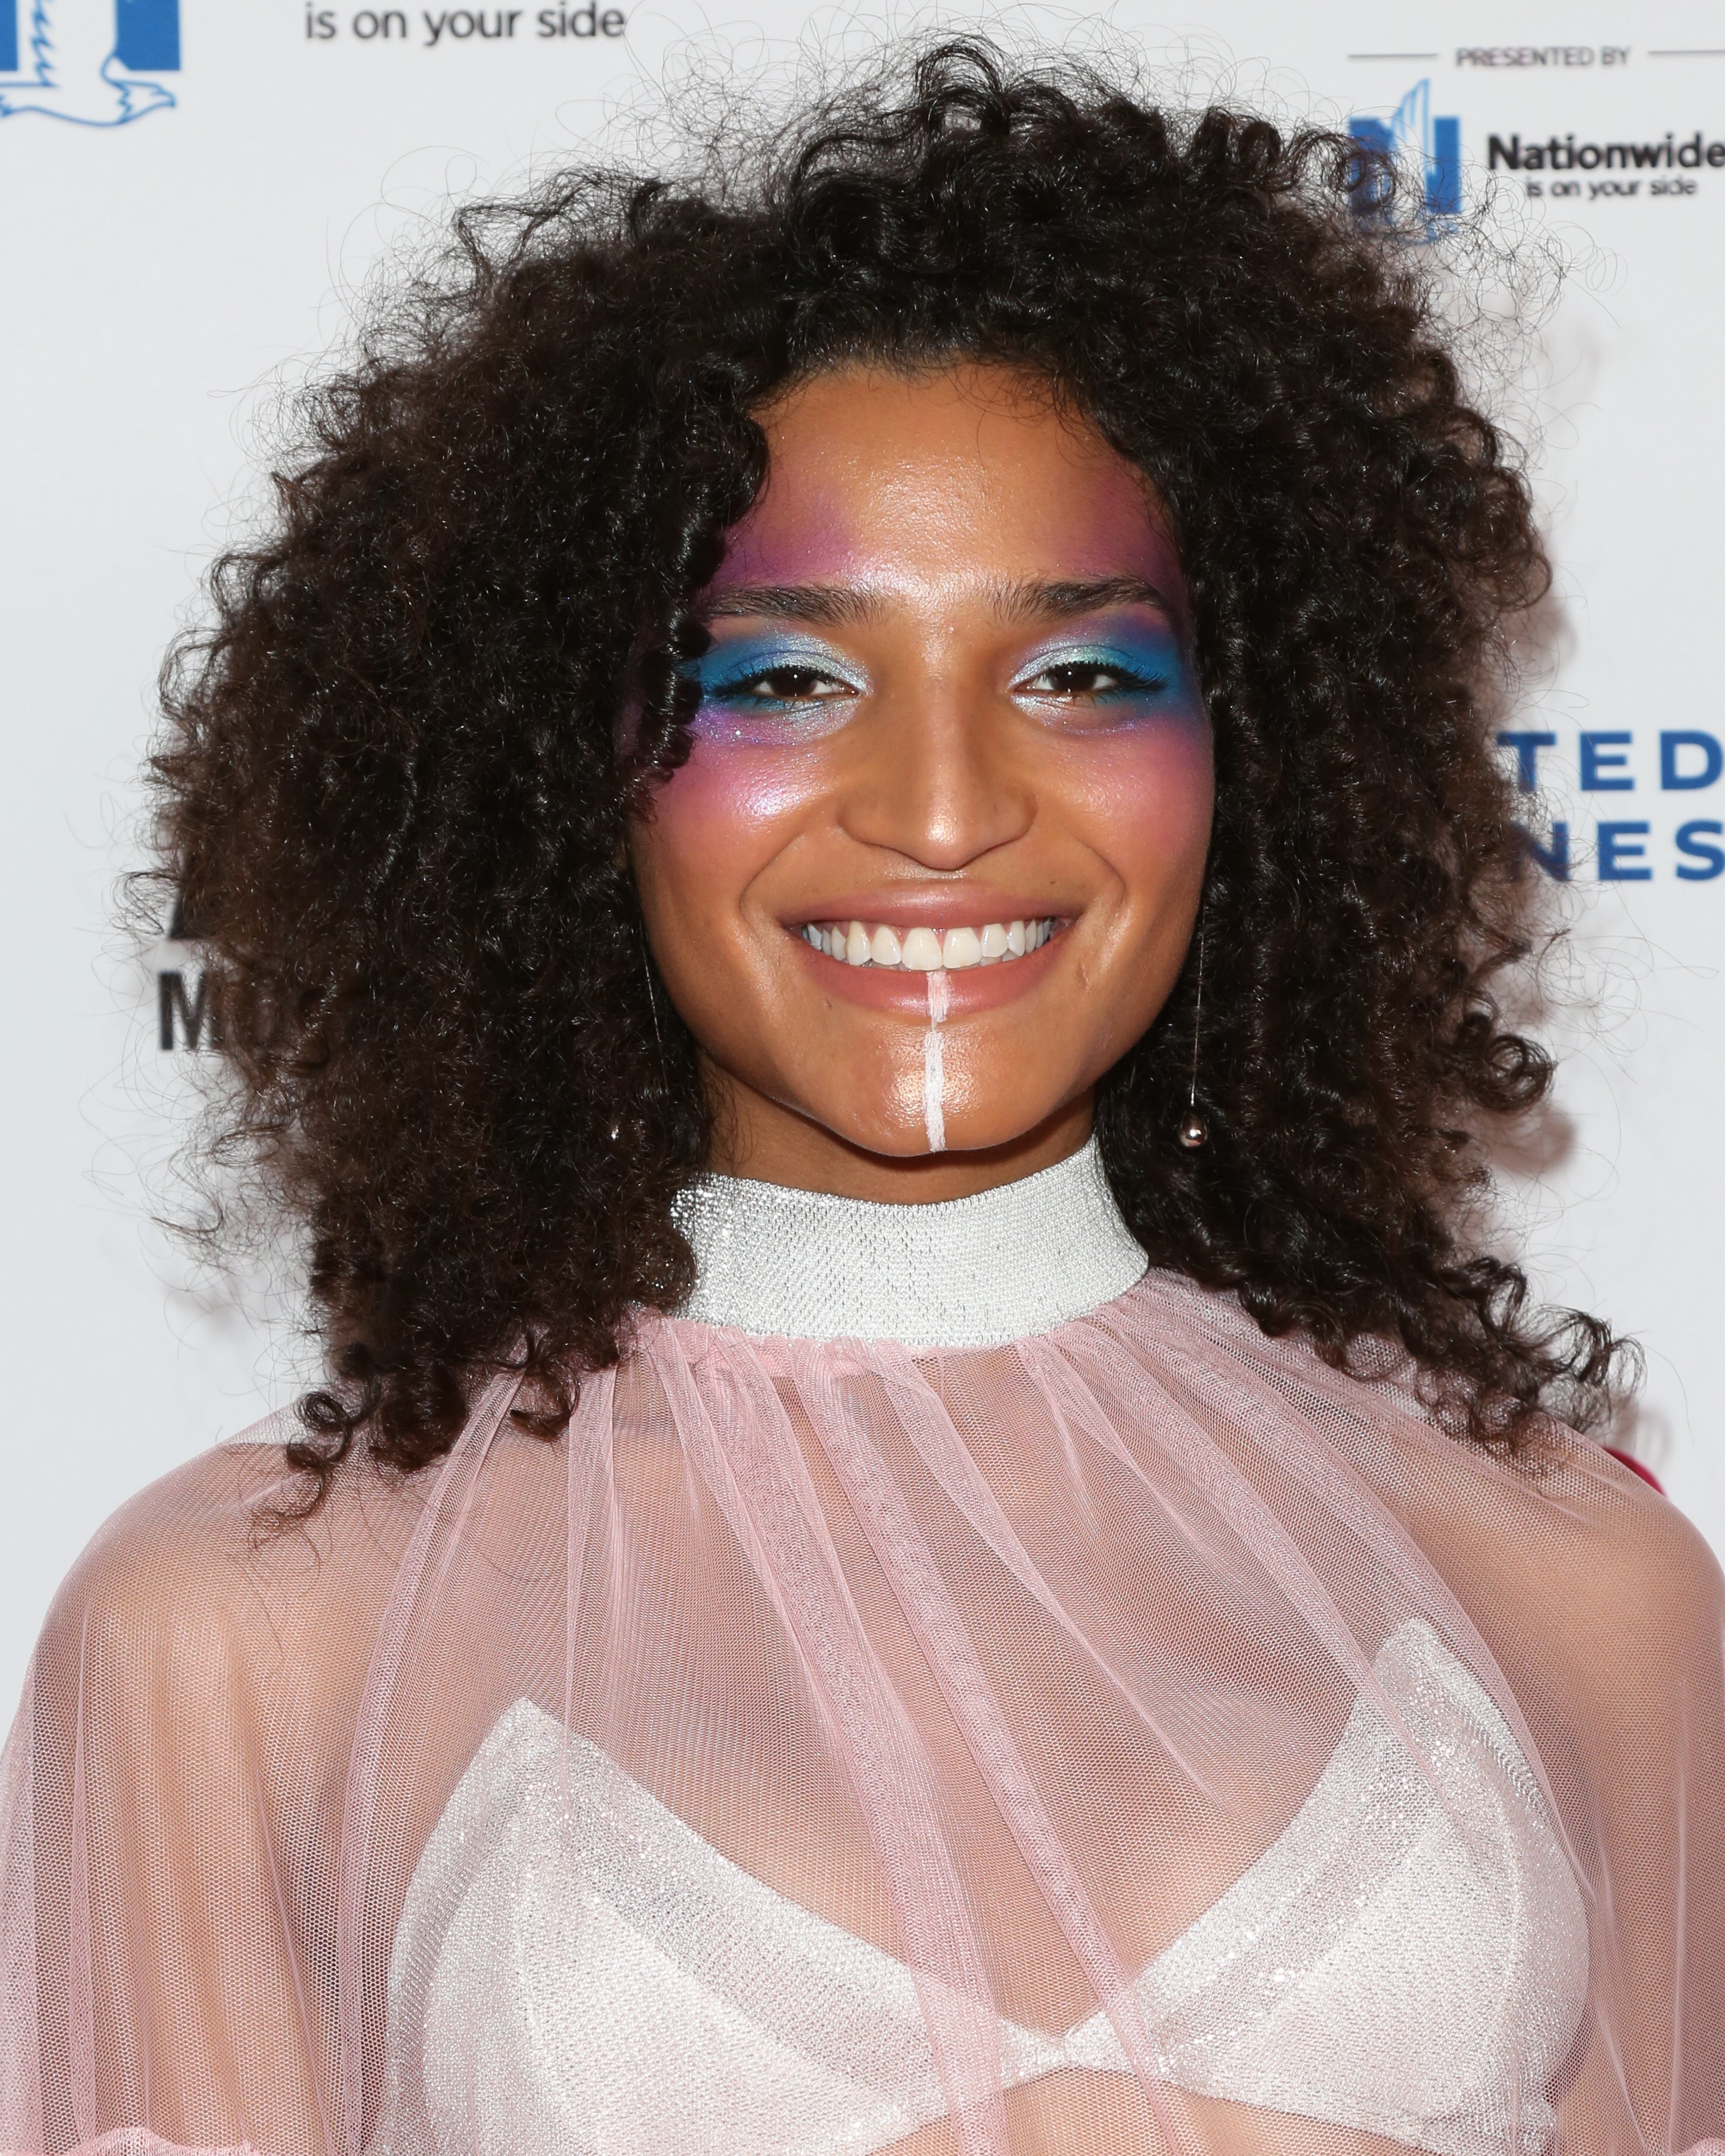 12 Times Indya Moore’s Red Carpet Pose Gave Us A True Beauty Moment